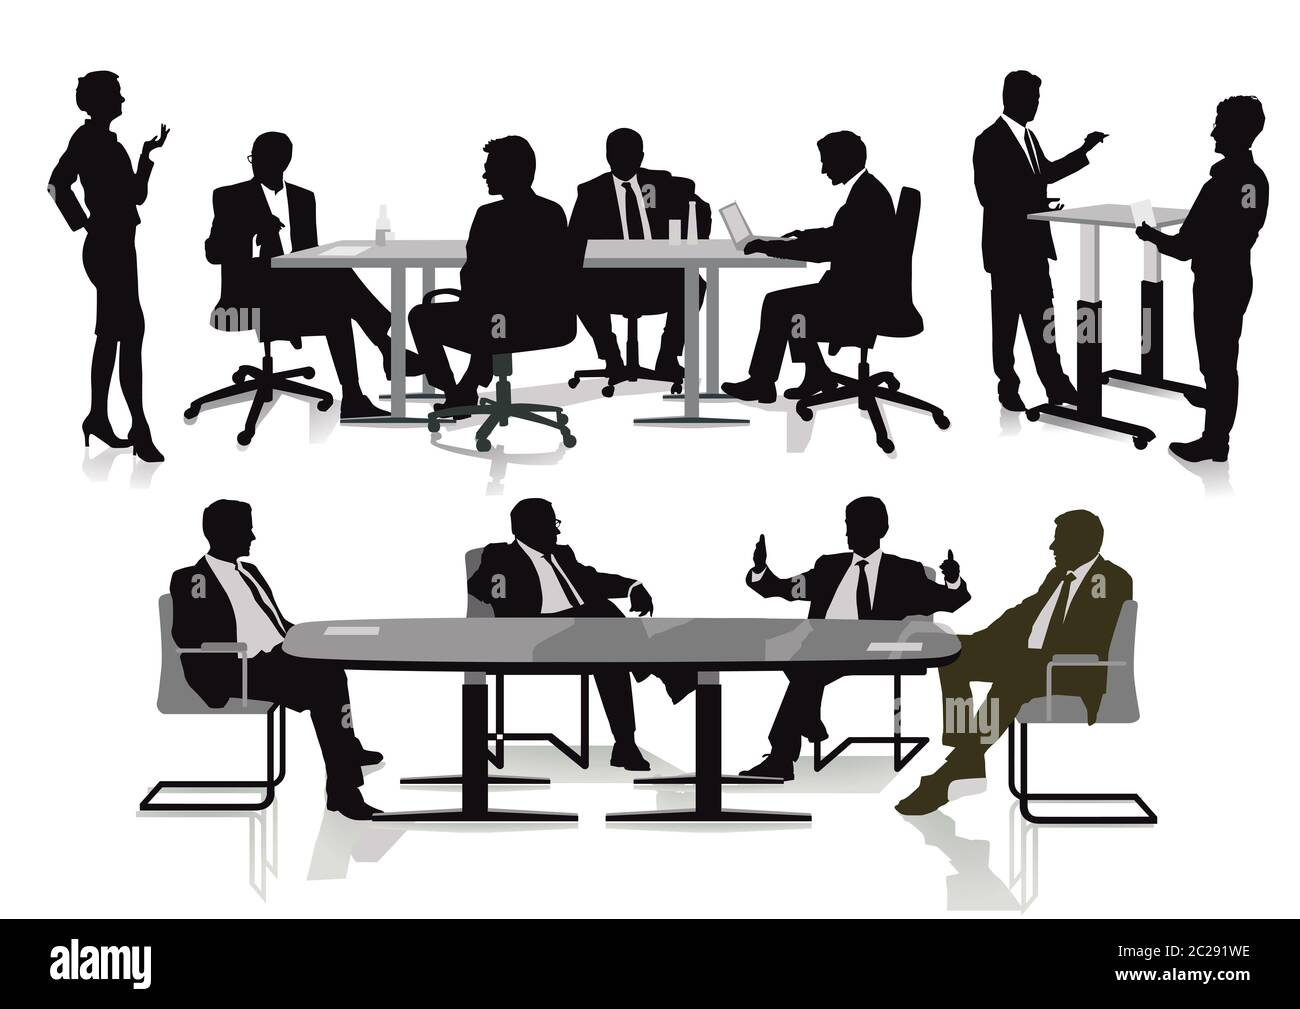 Teamwork of business people Stock Photo